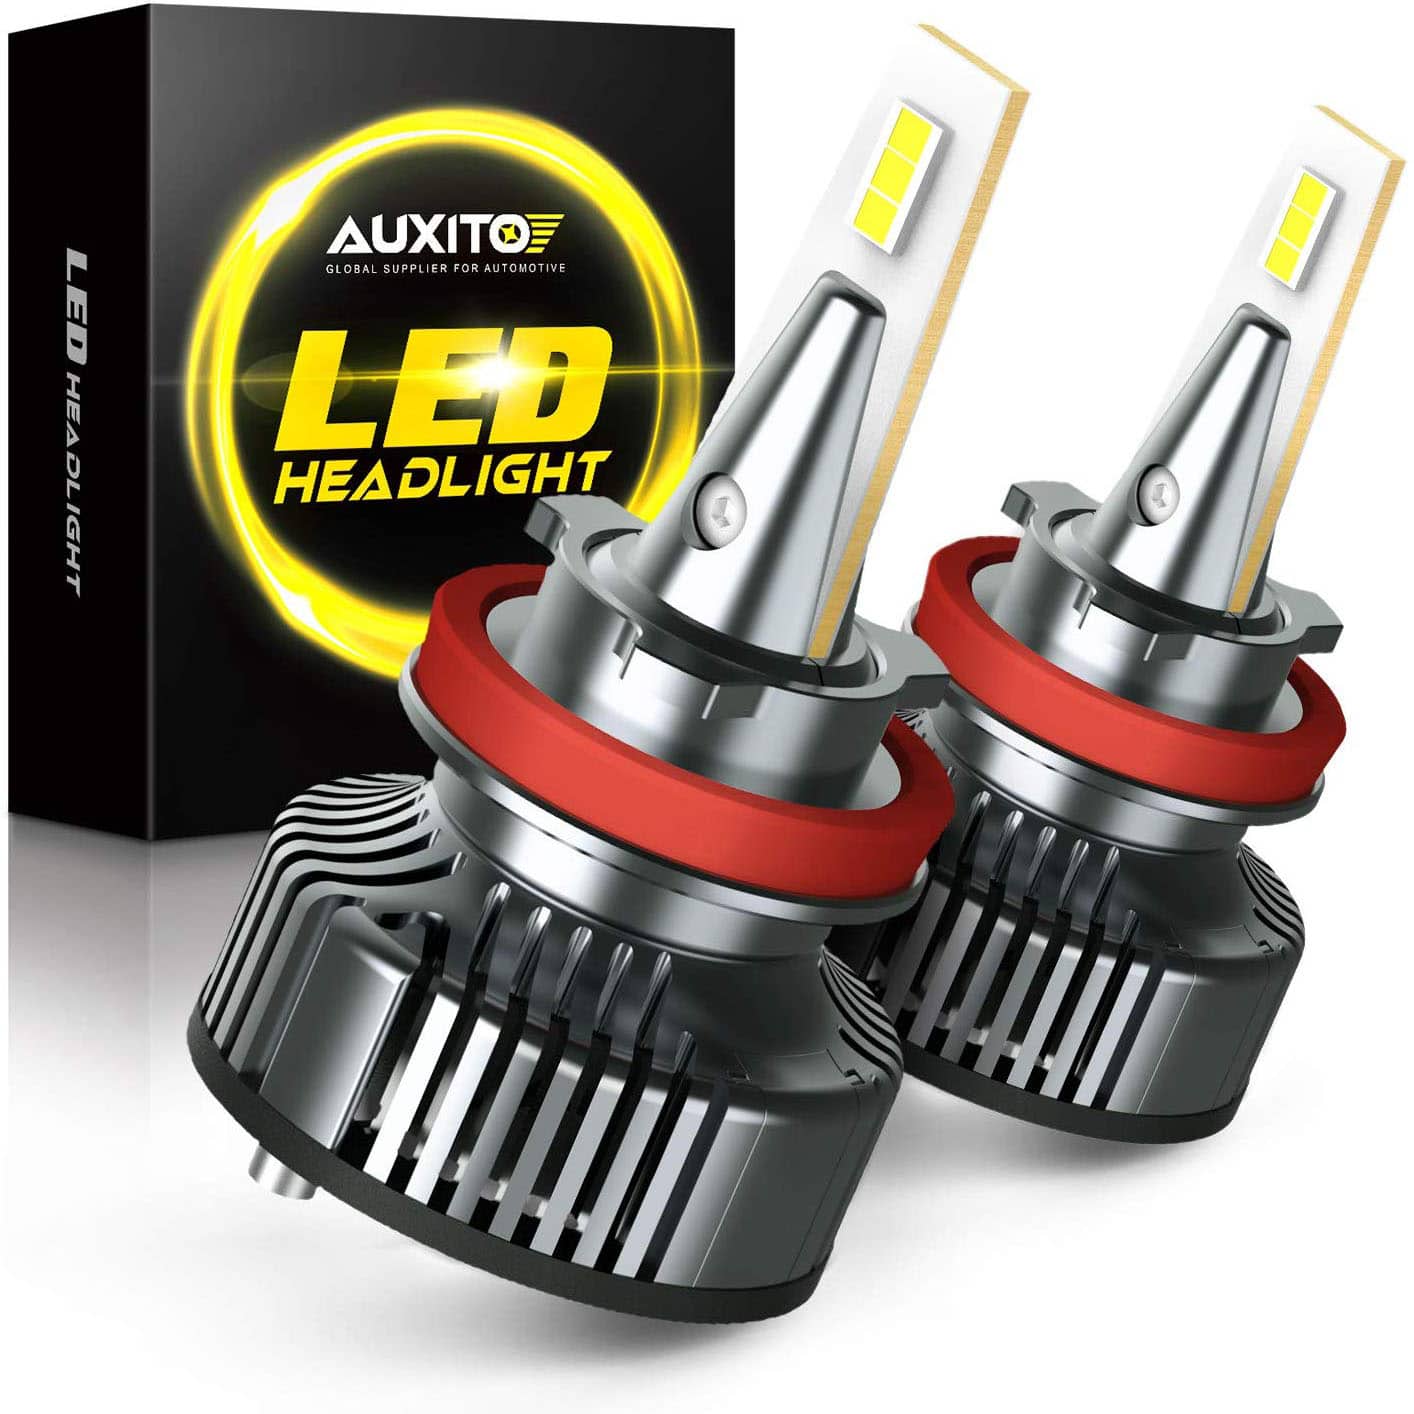 Top 10 Best LED Headlight Bulbs for Car in 2022 Reviews Guide